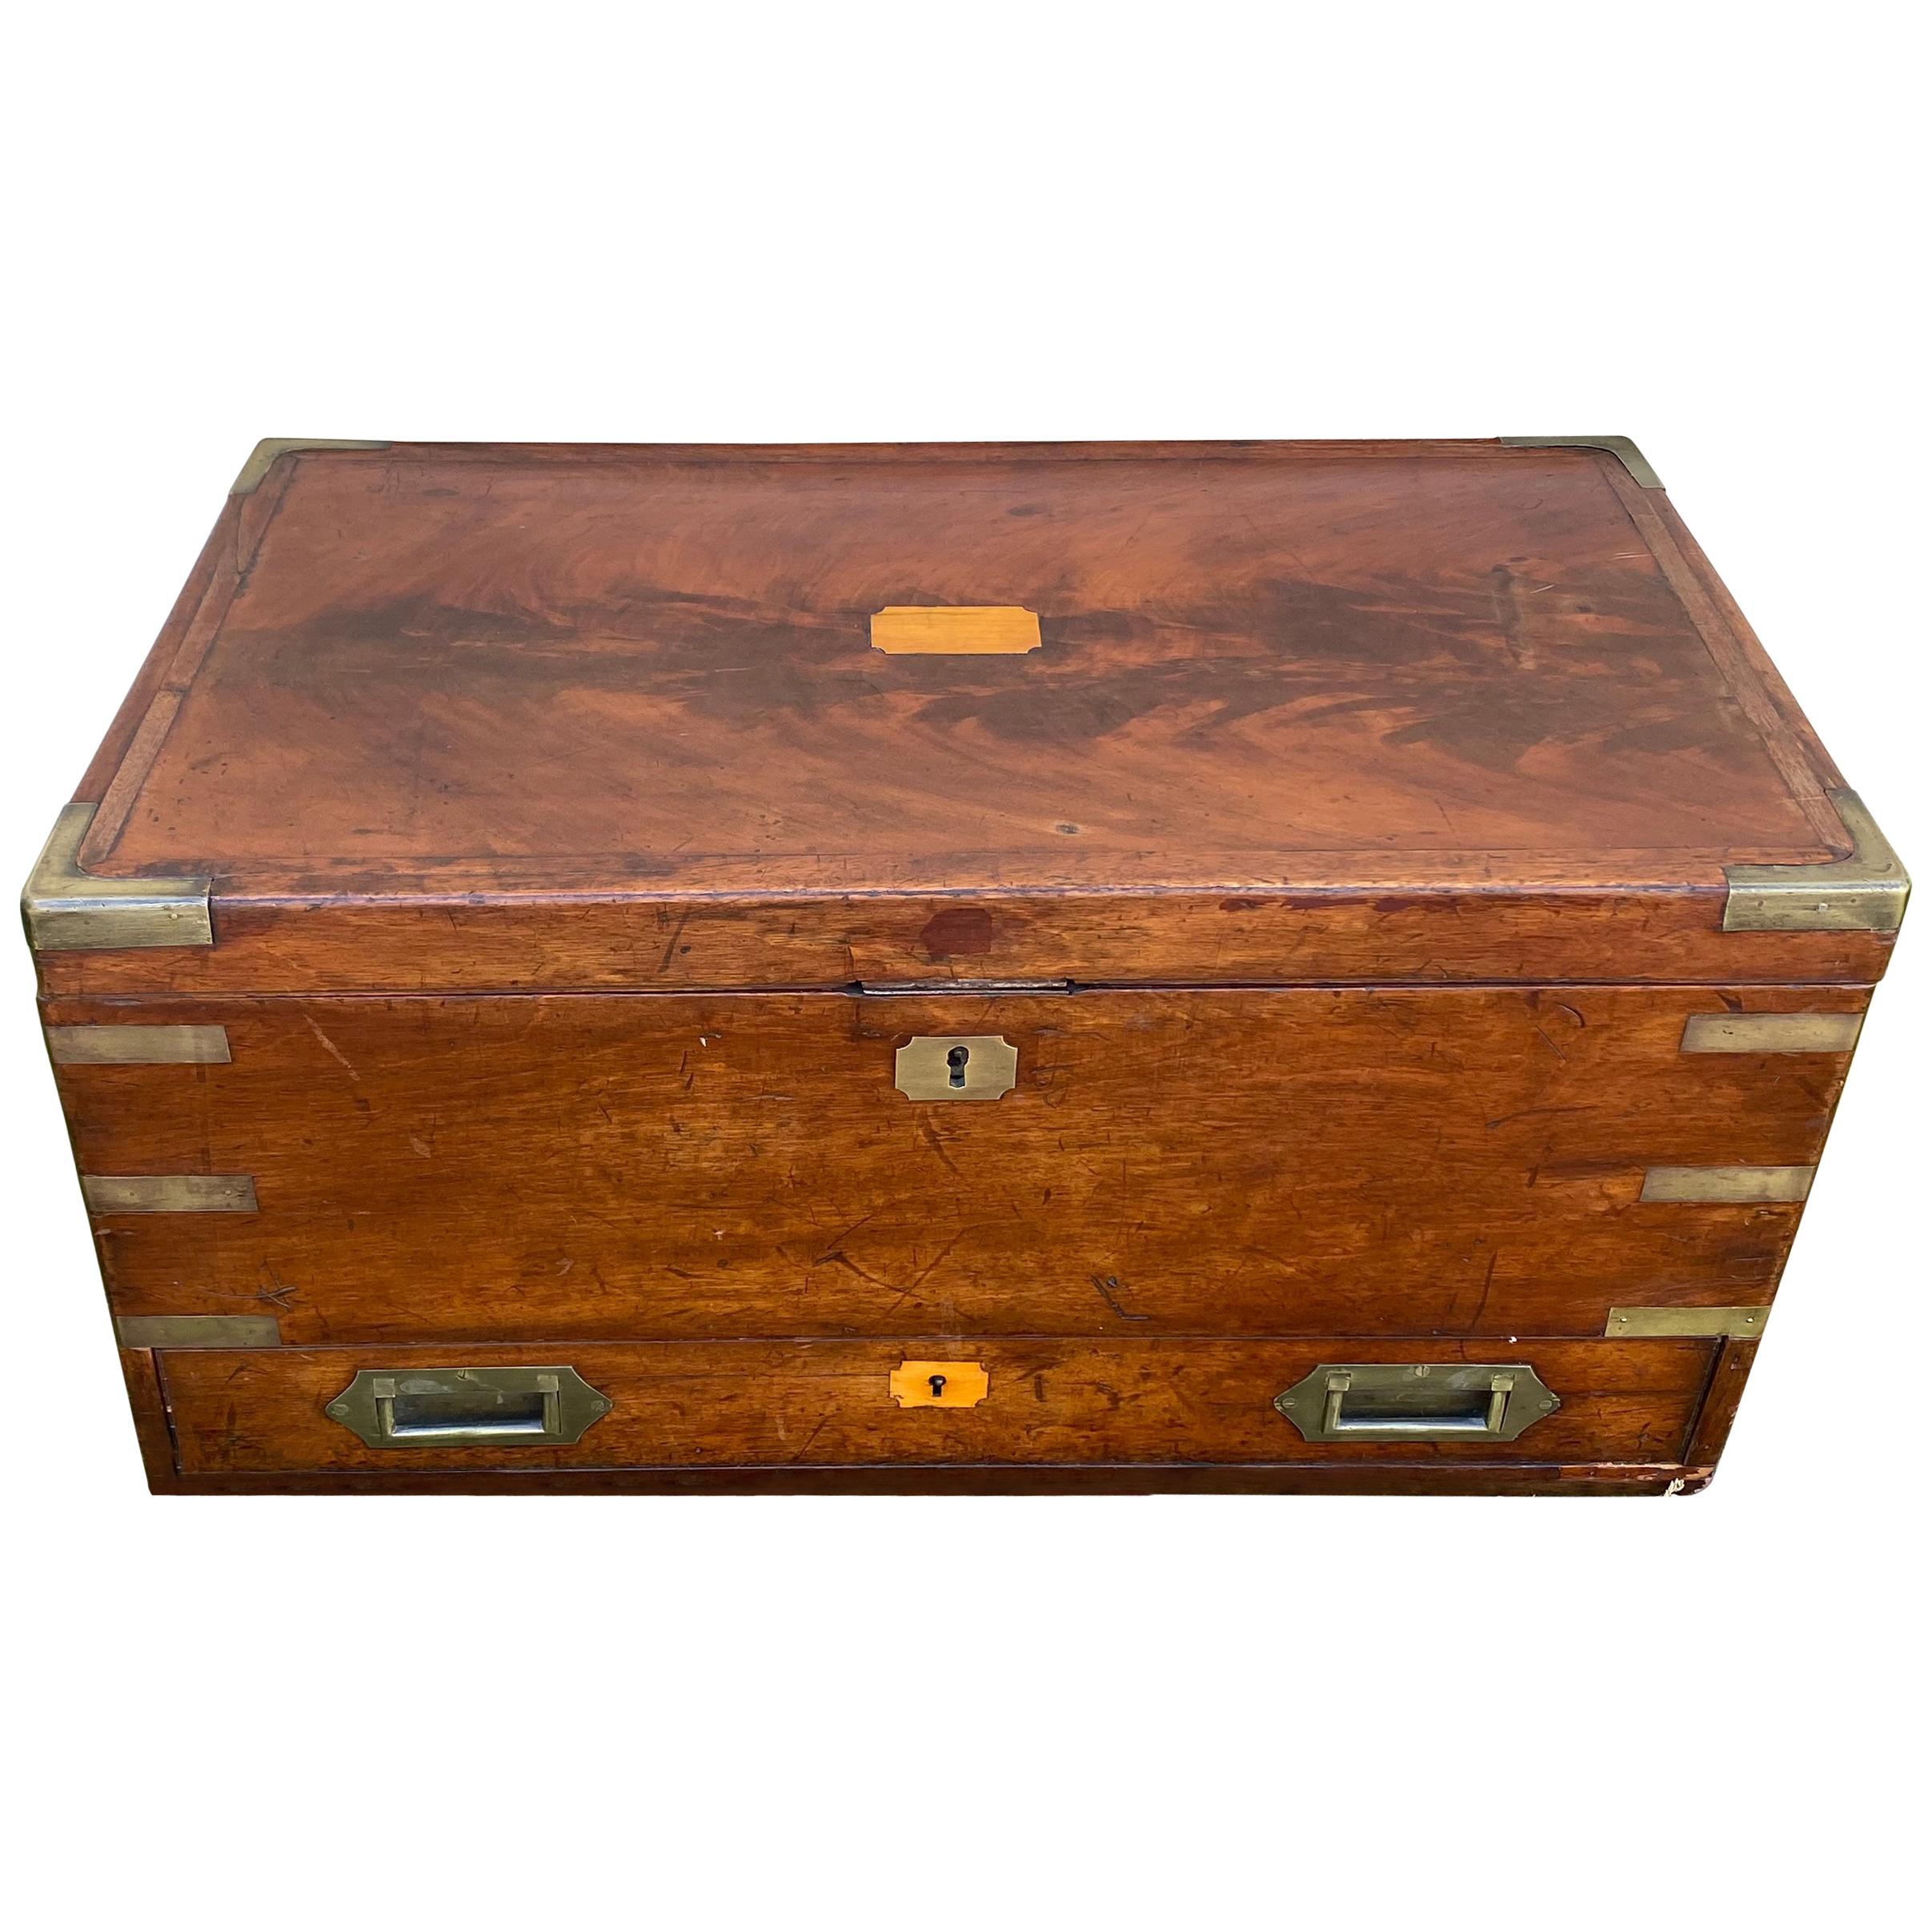 19th Century Brass Bound Mahogany British Campaign Trunk with Drawer